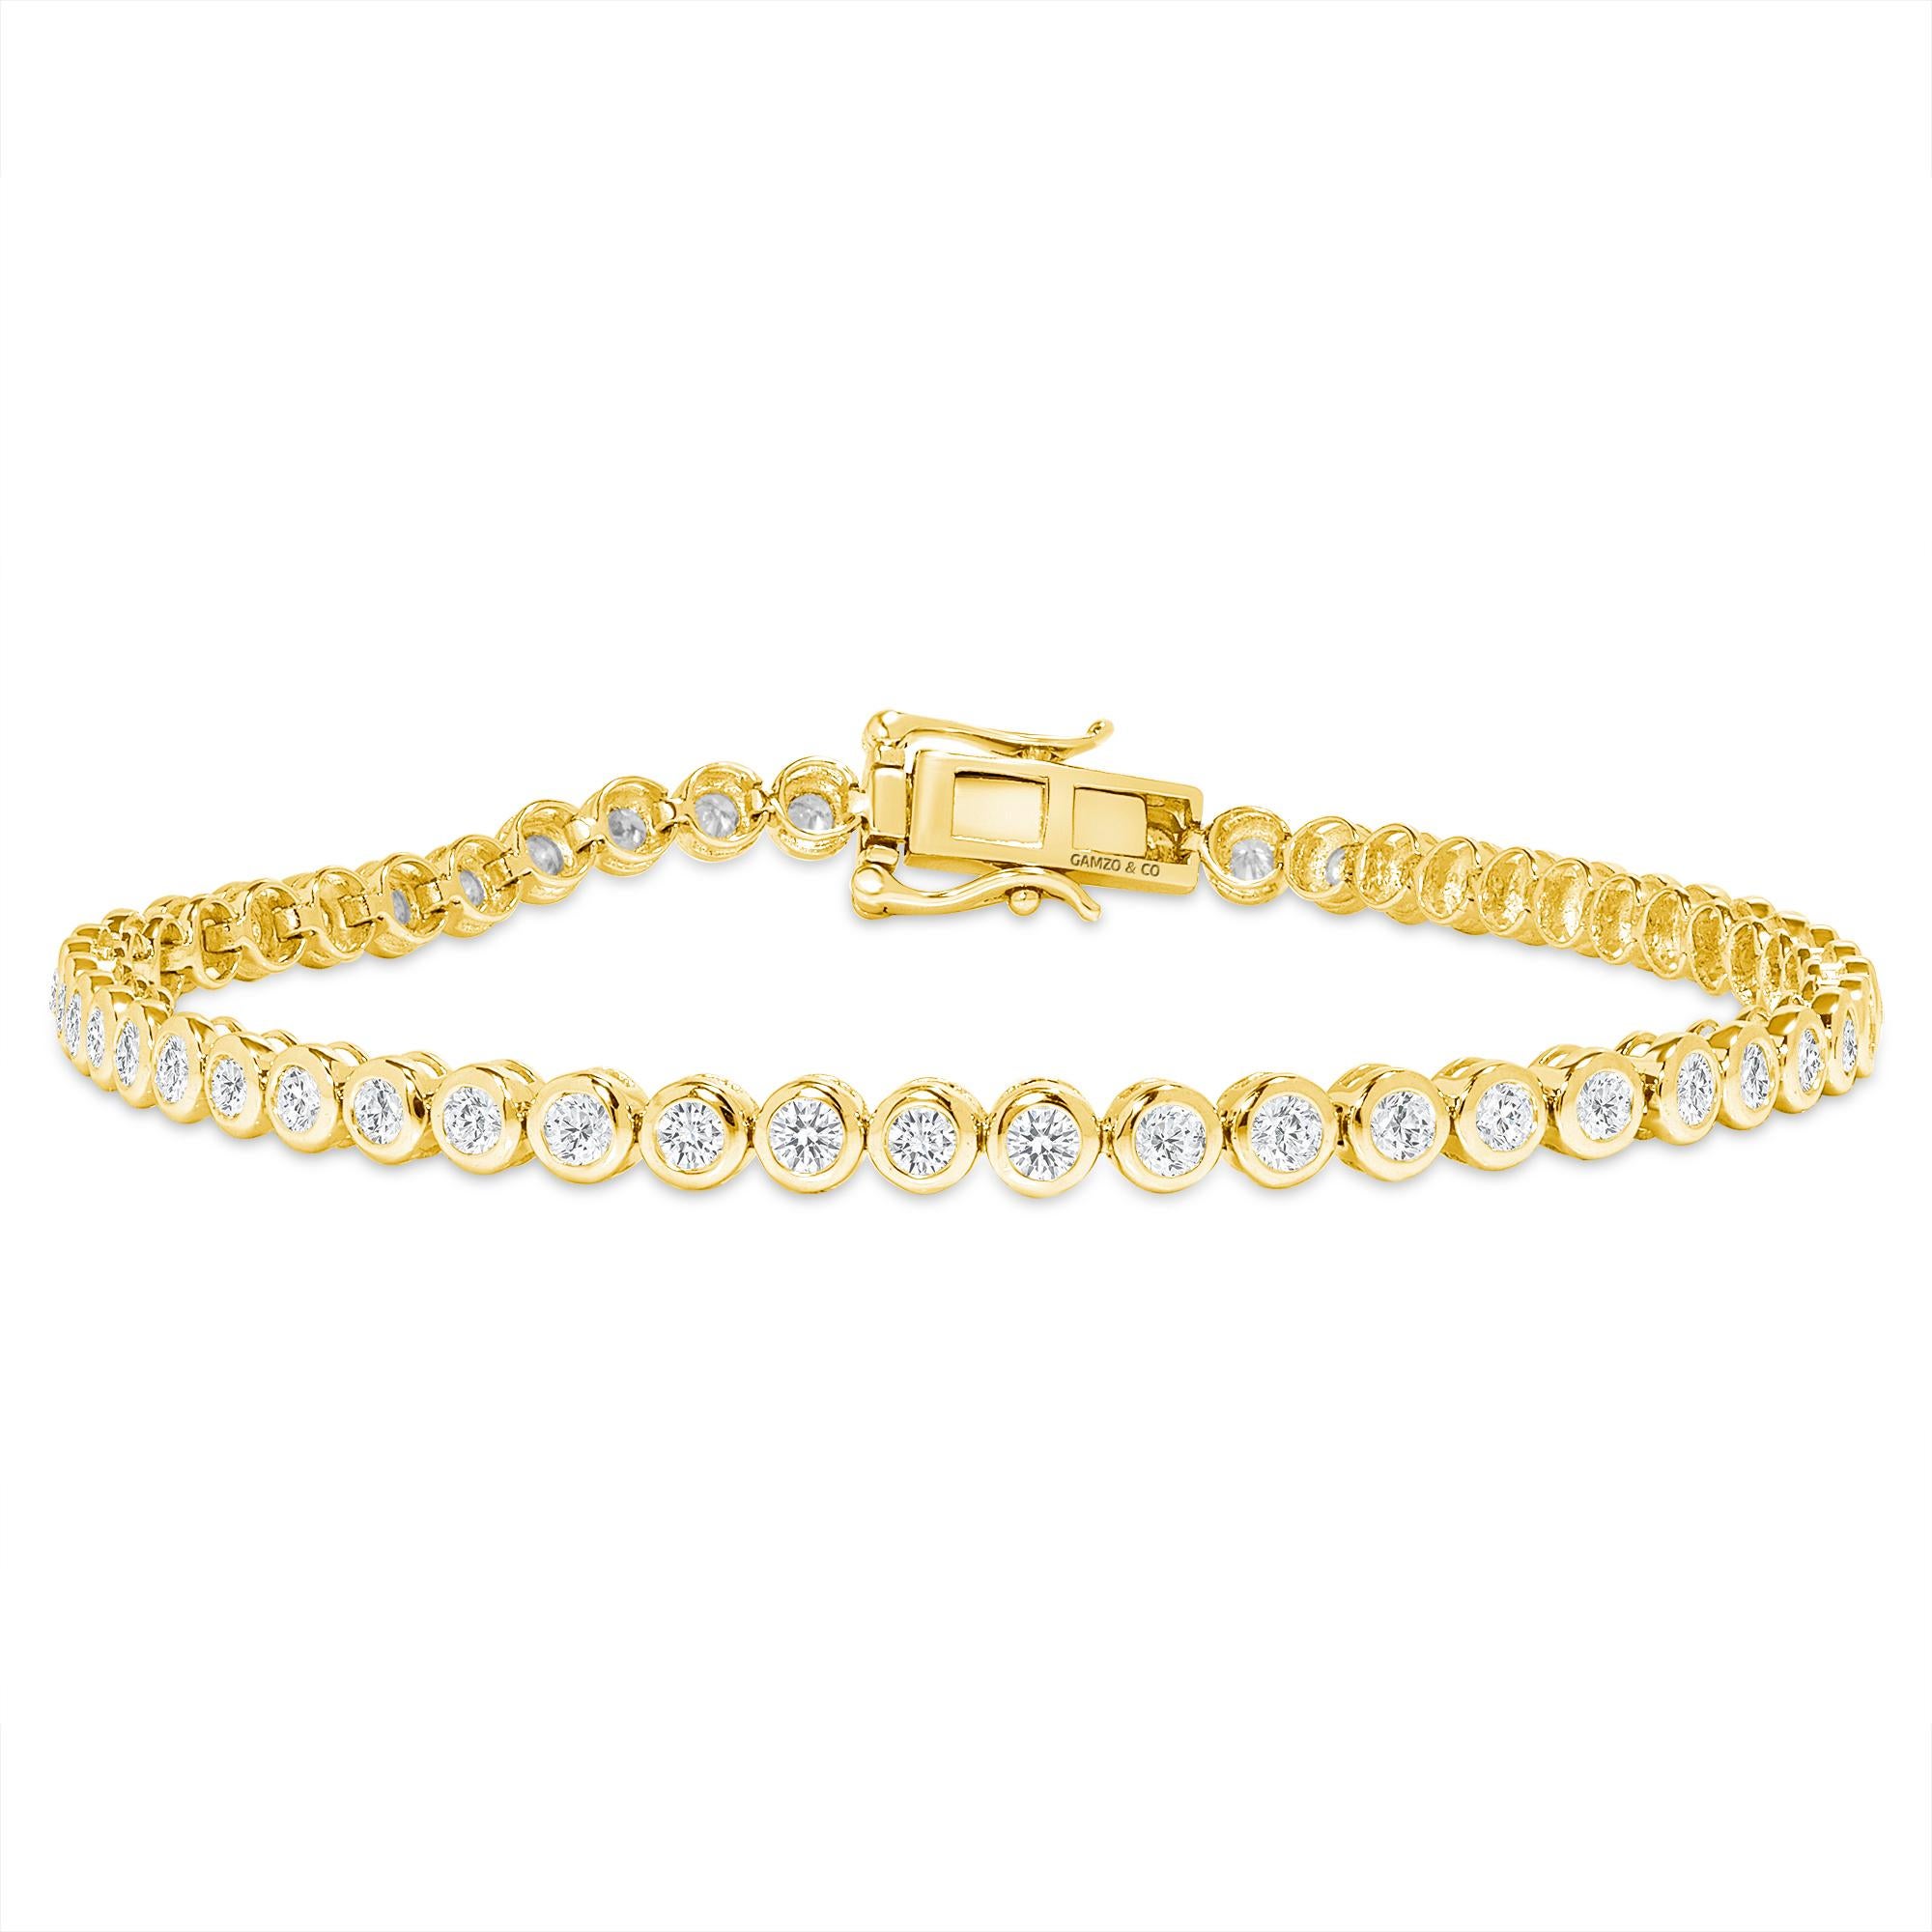 These beautiful round diamonds dance around your wrist as they absorb light and attention.
Metal: 14k Gold
Diamond Cut: Round
Diamond Total Carats: 3ct
Diamond Clarity: VS
Diamond Color: F
Color: Yellow Gold
Bracelet Length: 8.5 Inches 
Included